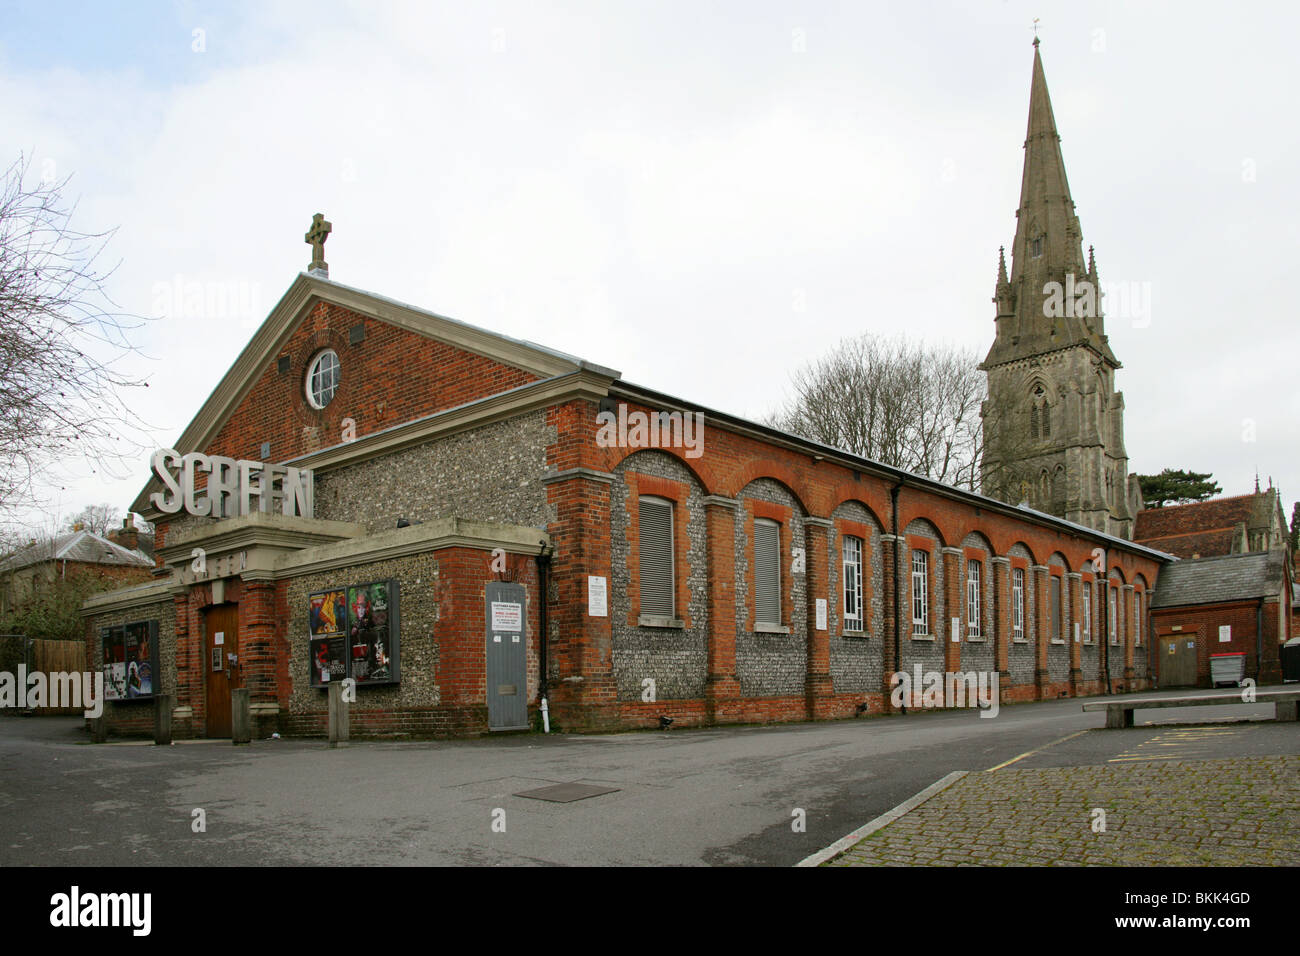 Screen Cinema, Winchester, Hampshire, UK. Previously the Church Hall. Stock Photo